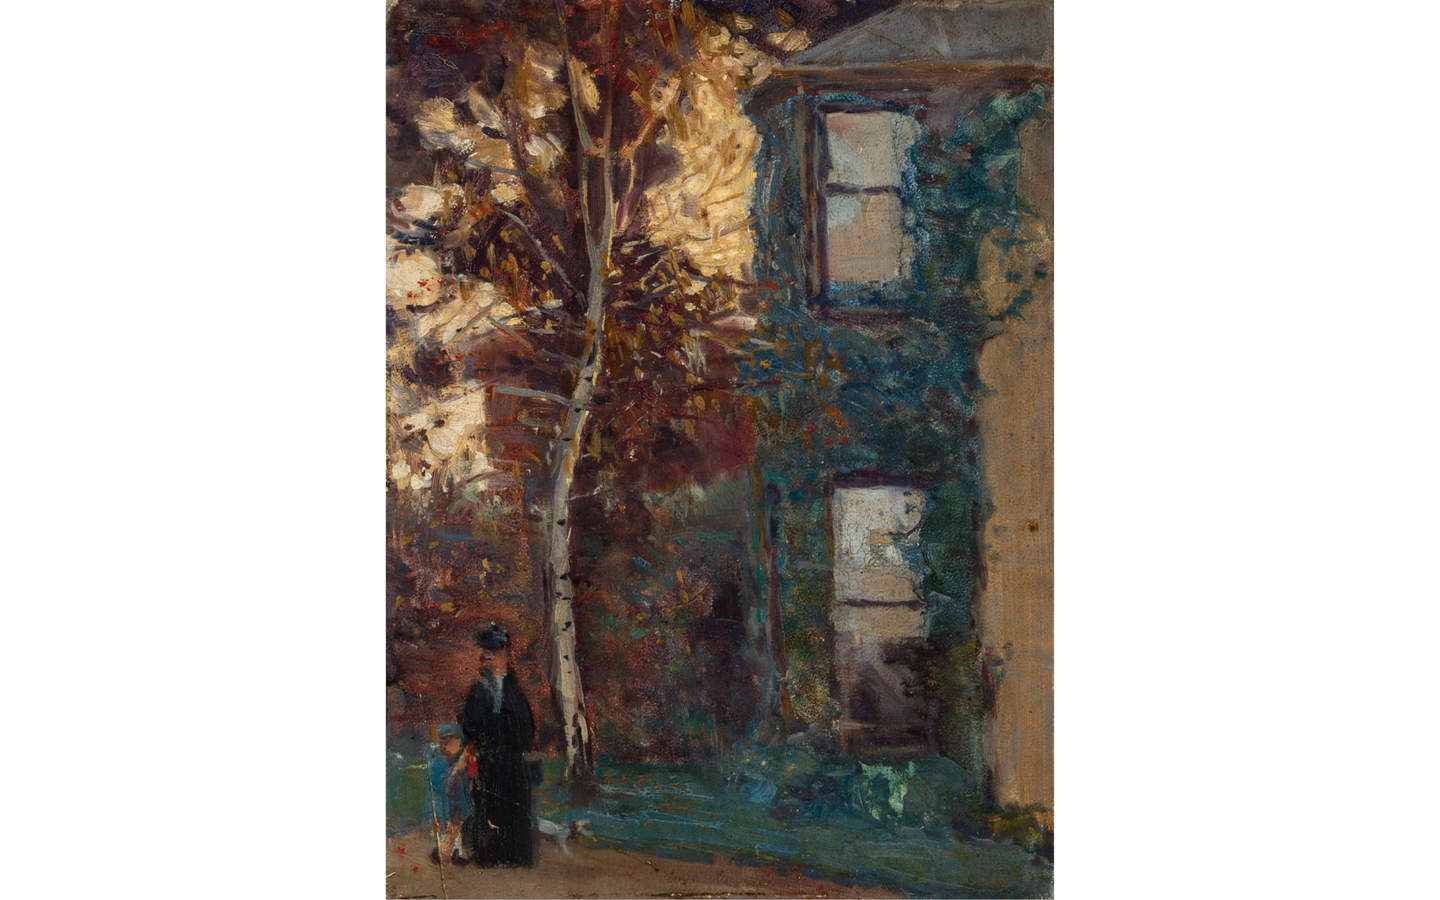 Painting of an exterior scene of a woman in a long black dress walking with a young giel in a lue dress and hat, beside them is a small dg. They are walking on a path besides a large tree and double story house which is covered in ivy.